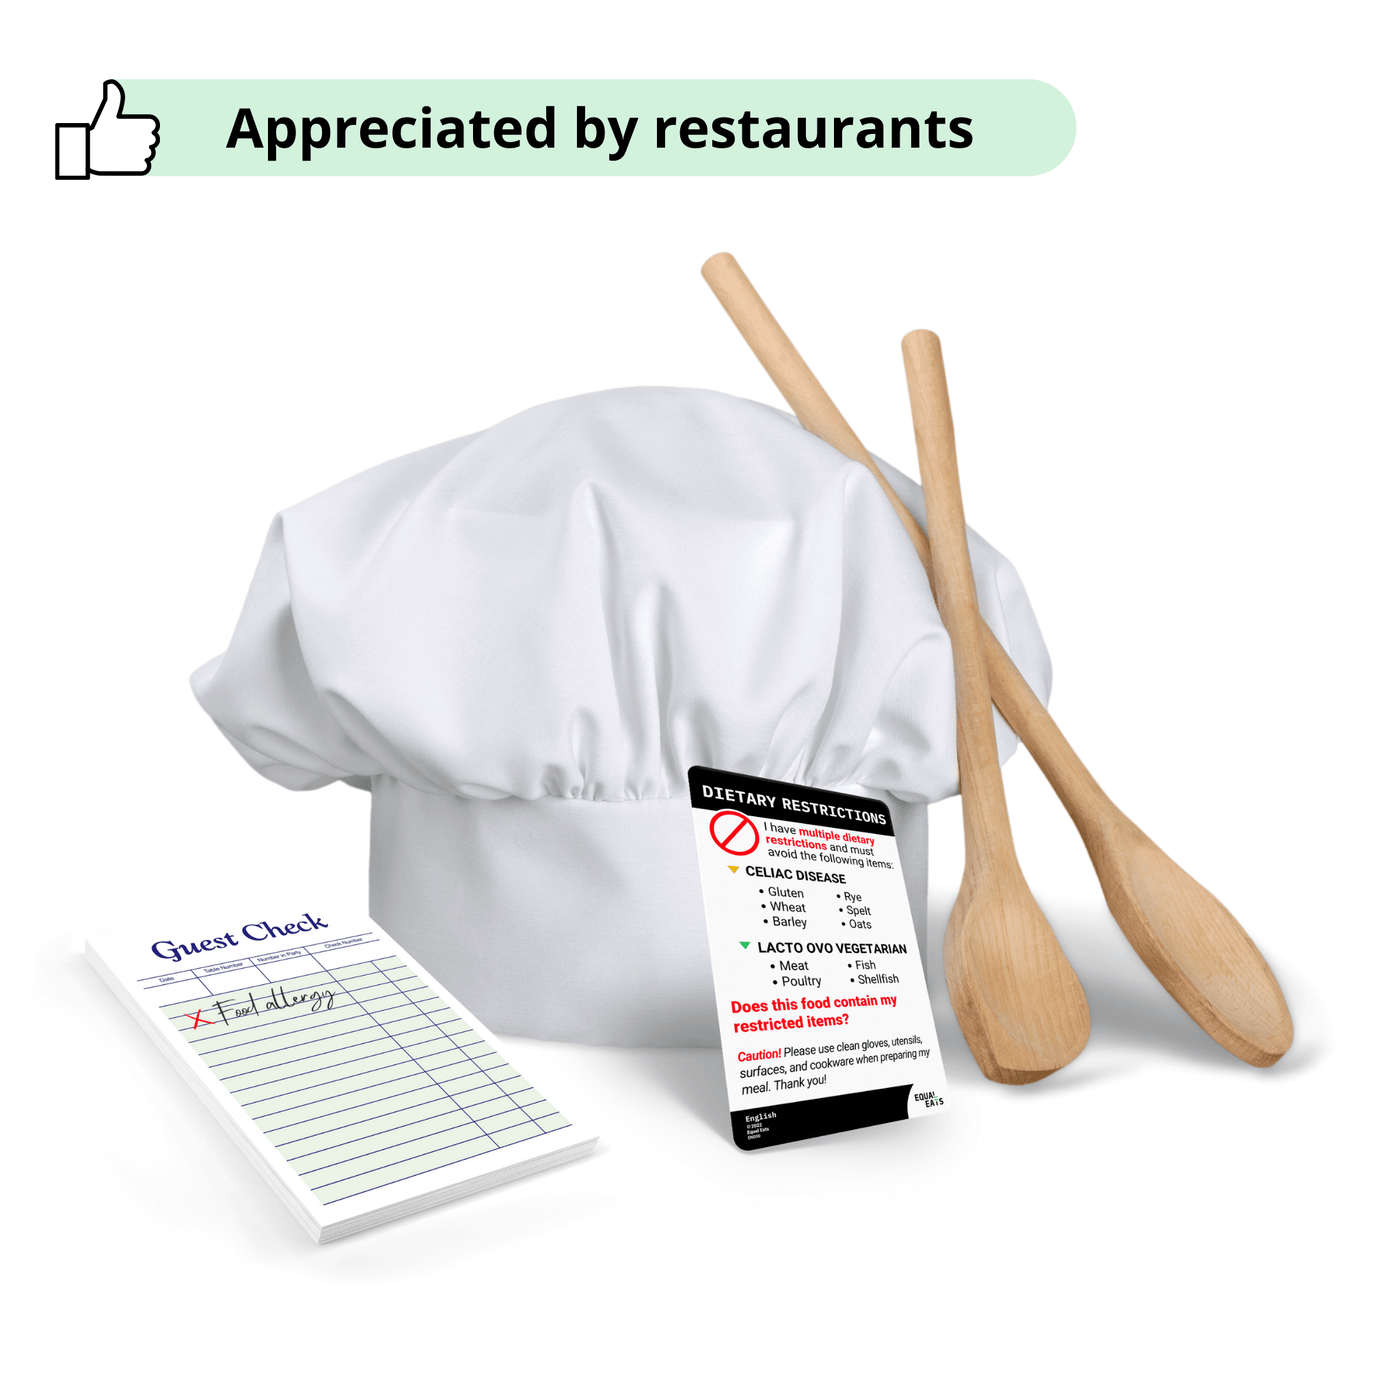 Allergy and Intolerance Chef Card